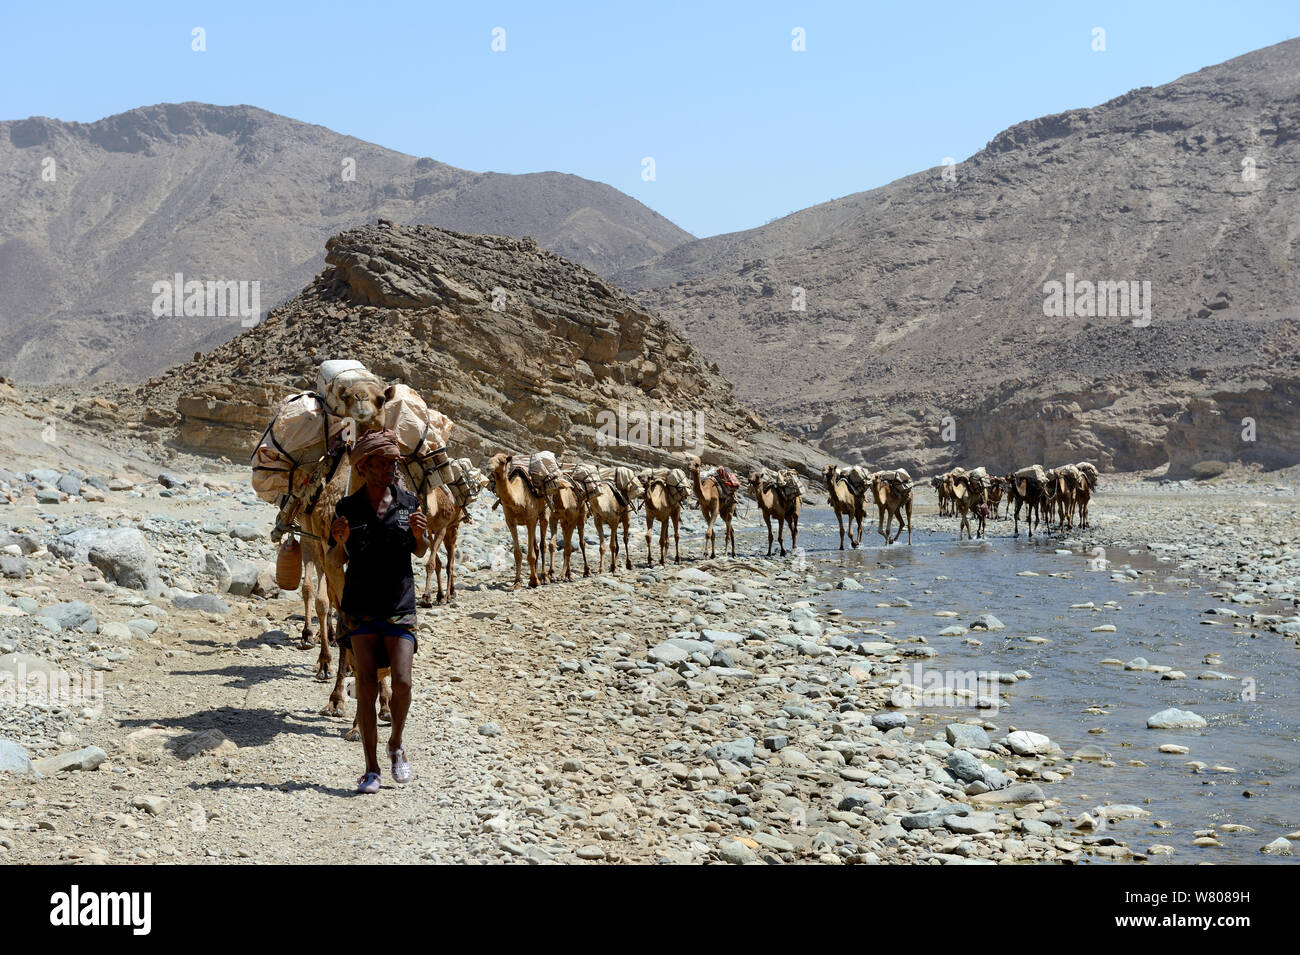 Salt caravans made up of hundreds of Dromedary camels (Camelus dromedarius) and their pullers transporting salt slabs cut from the salt lake Assale, to Mekele market, Saba Canyon, Danakil Depression, Afar region, Ethiopia, March 2015. Stock Photo